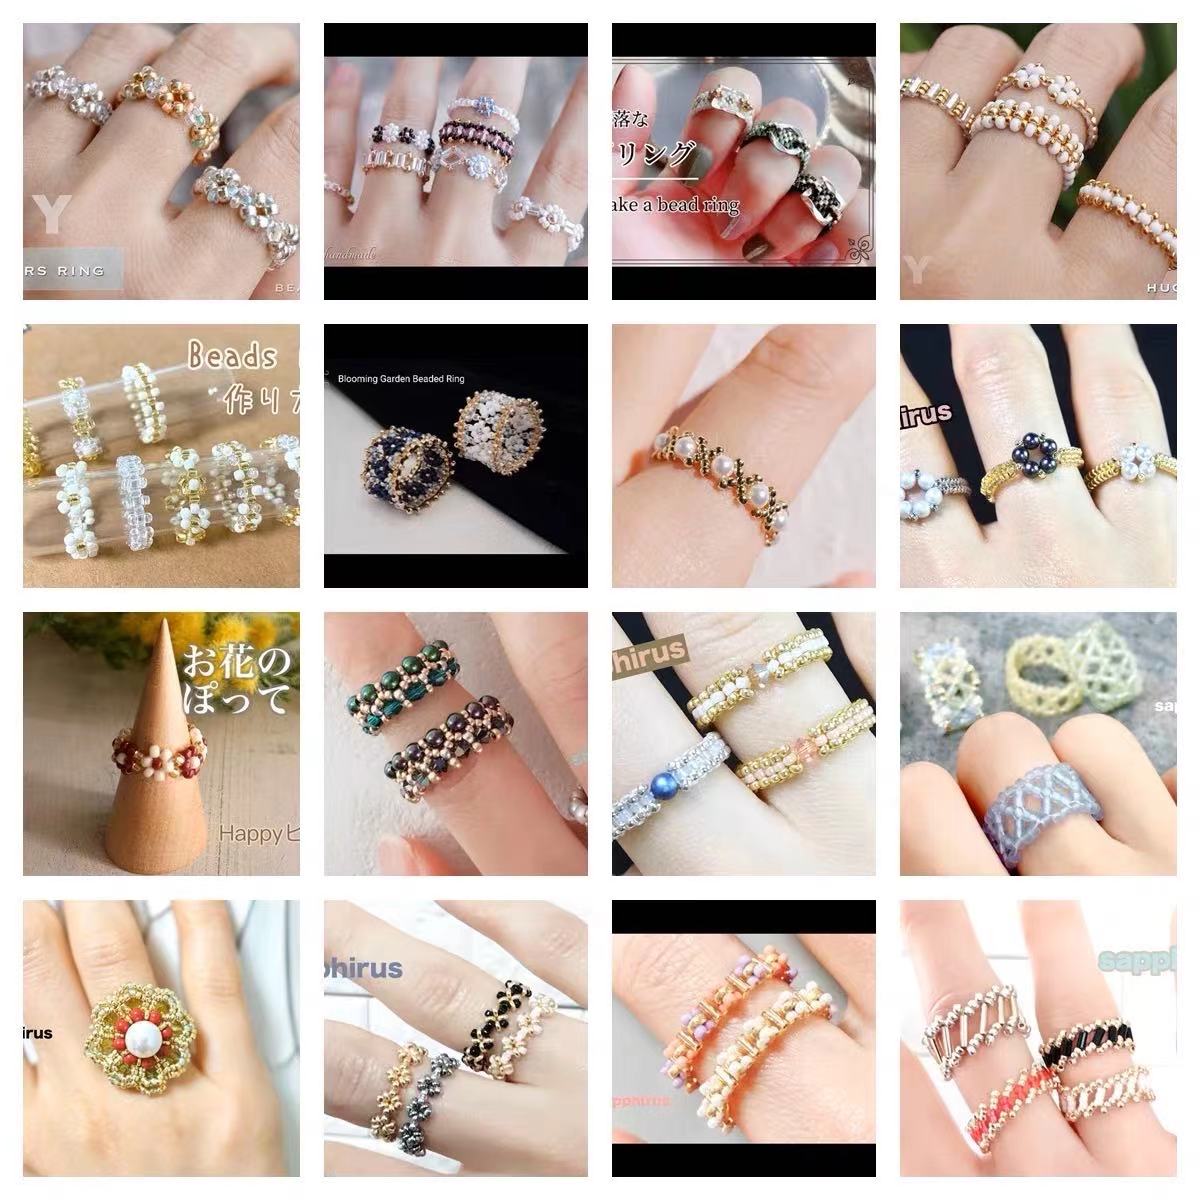 DIY Jewelry Tutorial Videos for 1,000+ styles